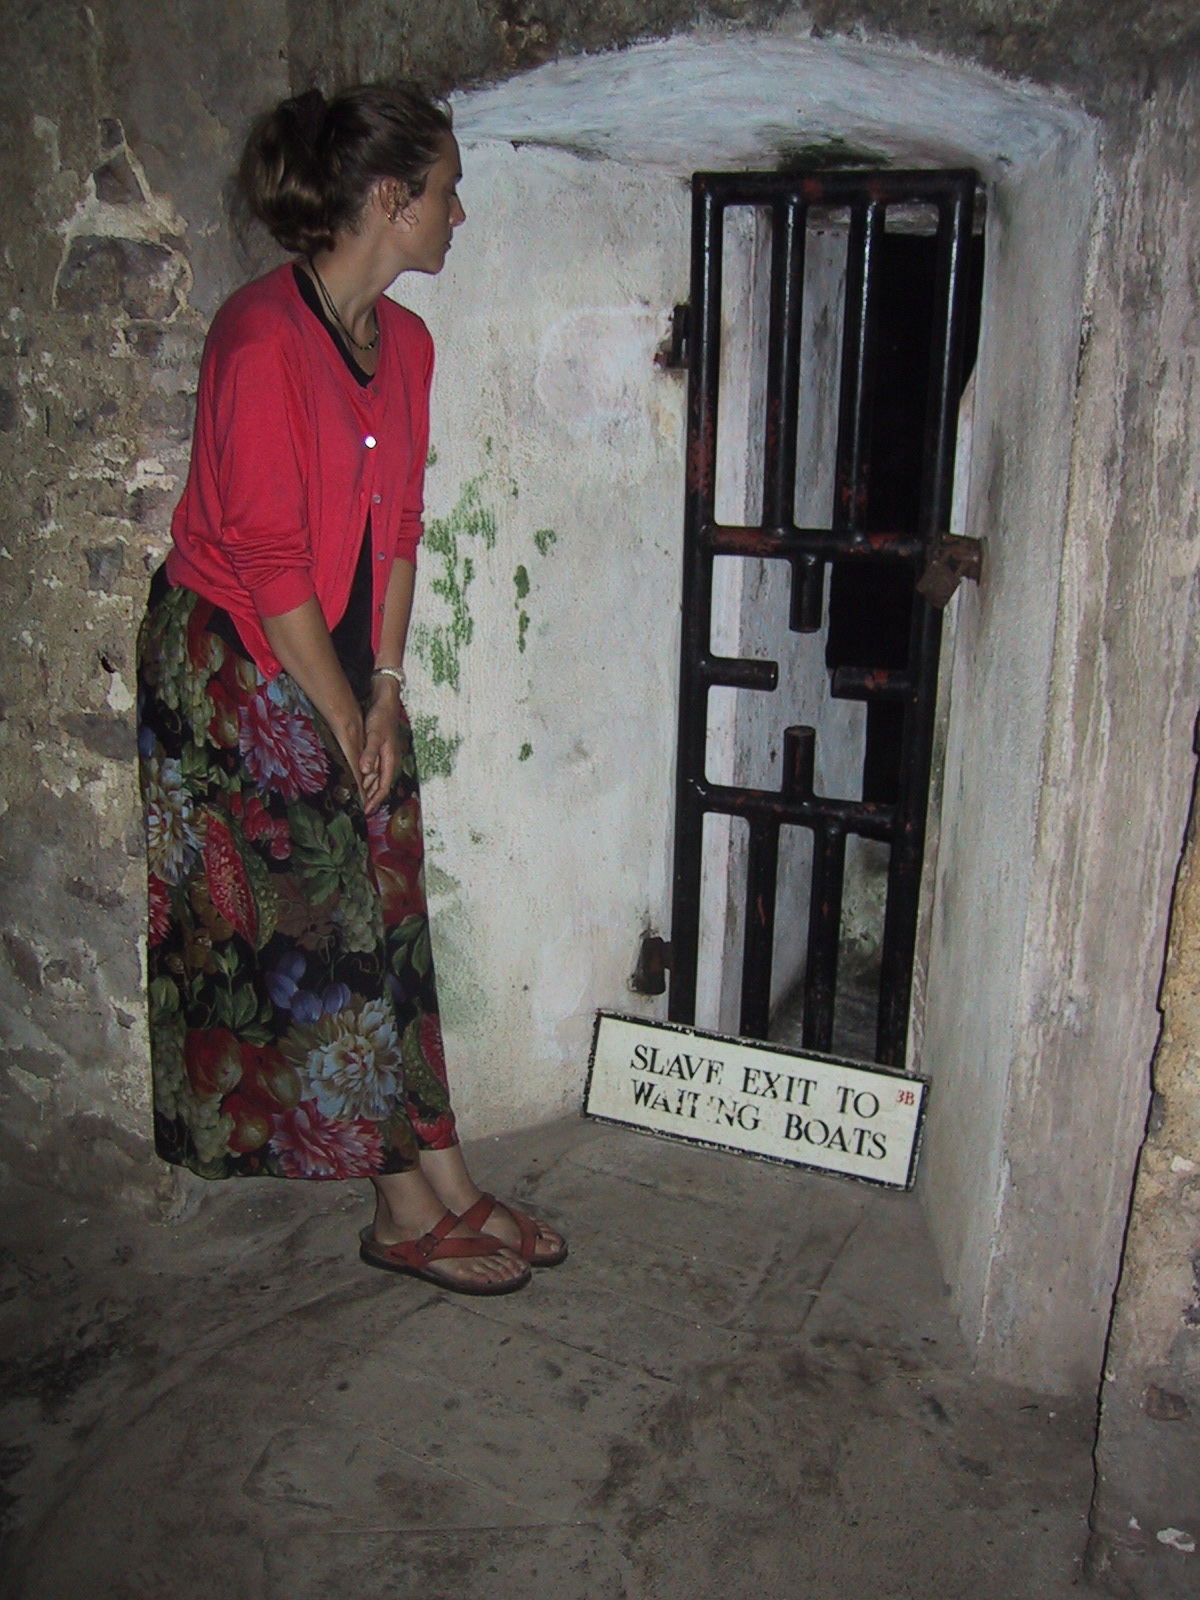 DeWolf family member Elizabeth Sturges Llerena at Elmina Castle in Ghana. This small passageway was captive Africans’ last exit before being boarded onto ships for the Middle Passage across the Atlantic.